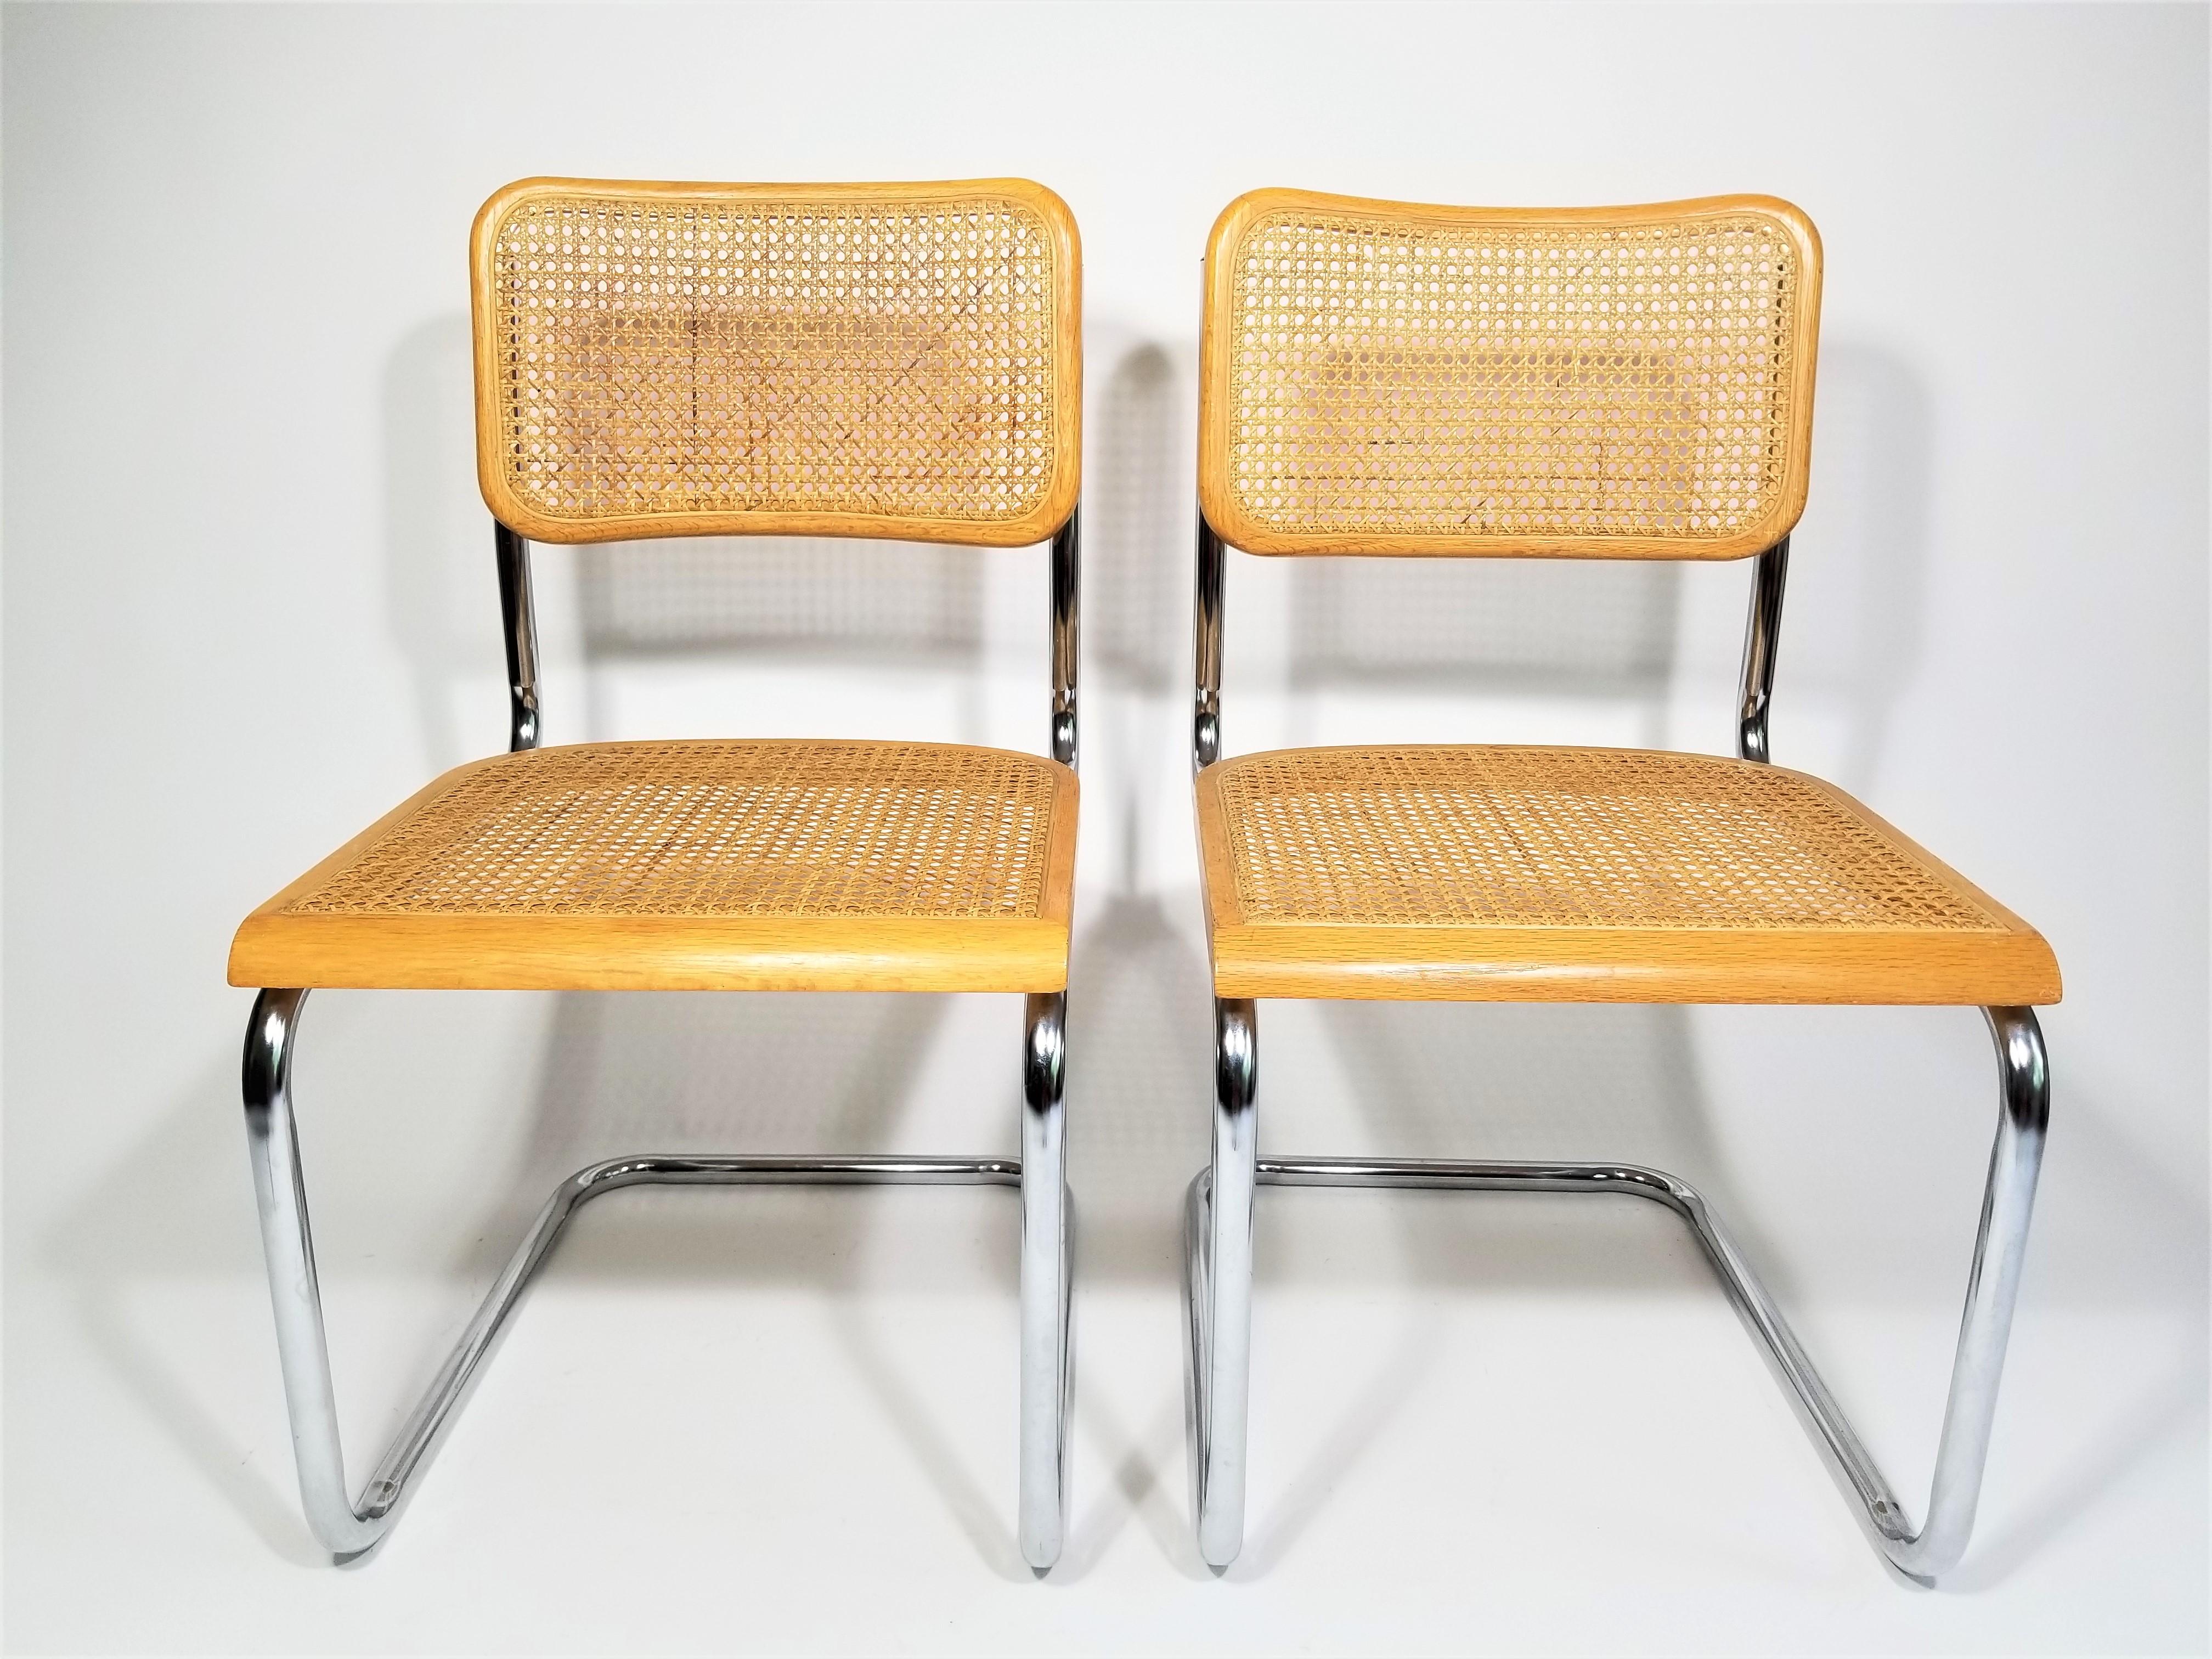 Midcentury pair of Marcel Breuer side chairs. Cane backs and seats. Classic chrome cantilevered frames. Excellent condition.
Complimentary delivery in NYC and surrounding areas can be arranged for this item.